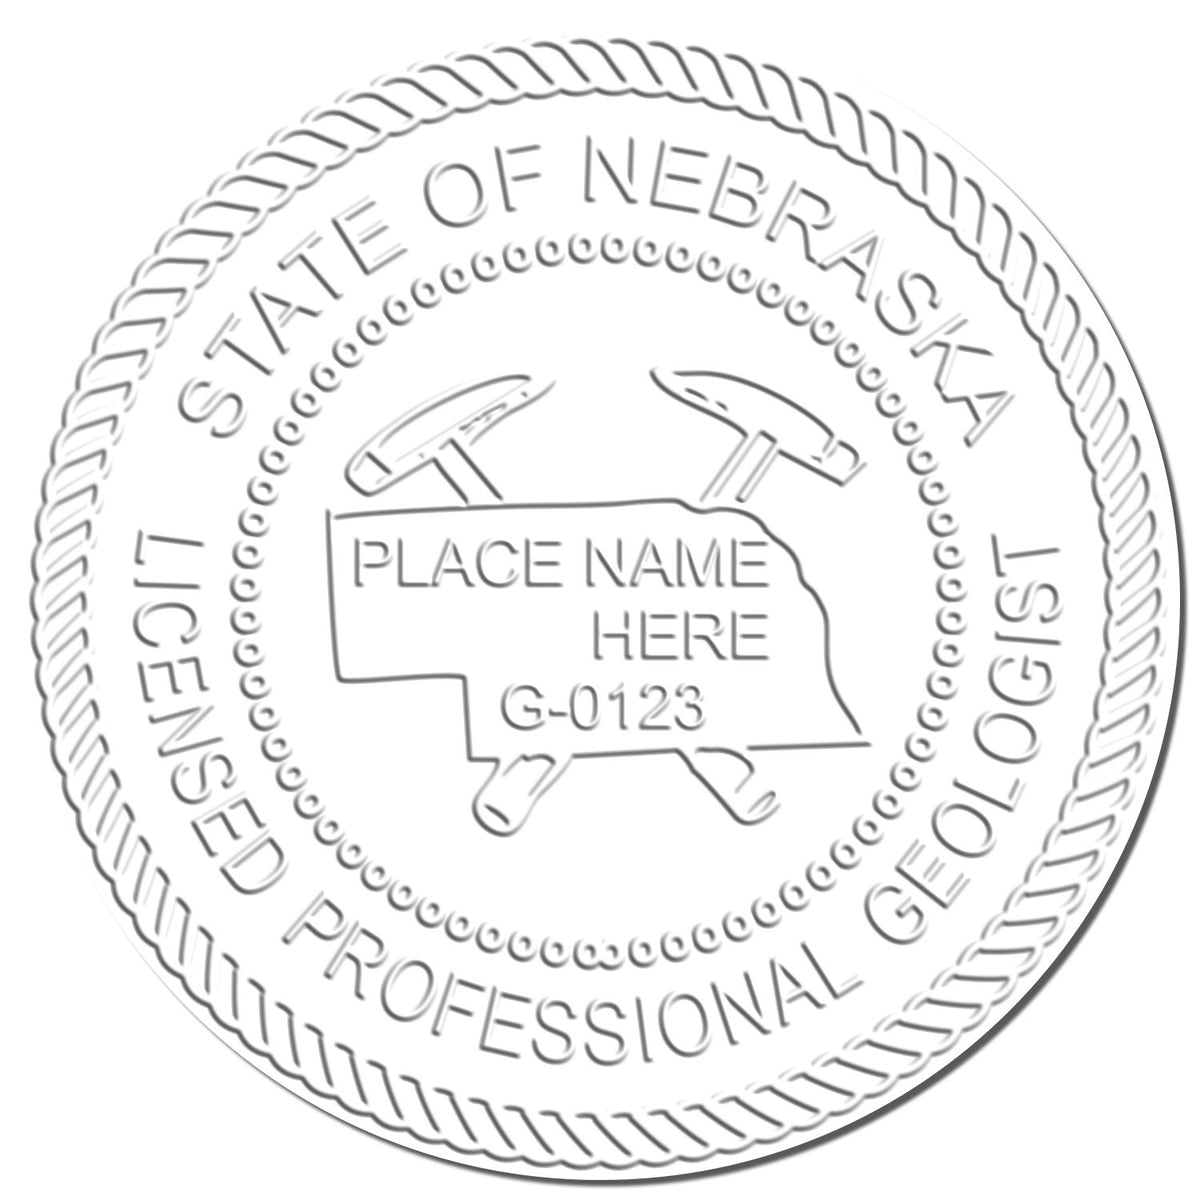 The Nebraska Geologist Desk Seal stamp impression comes to life with a crisp, detailed image stamped on paper - showcasing true professional quality.